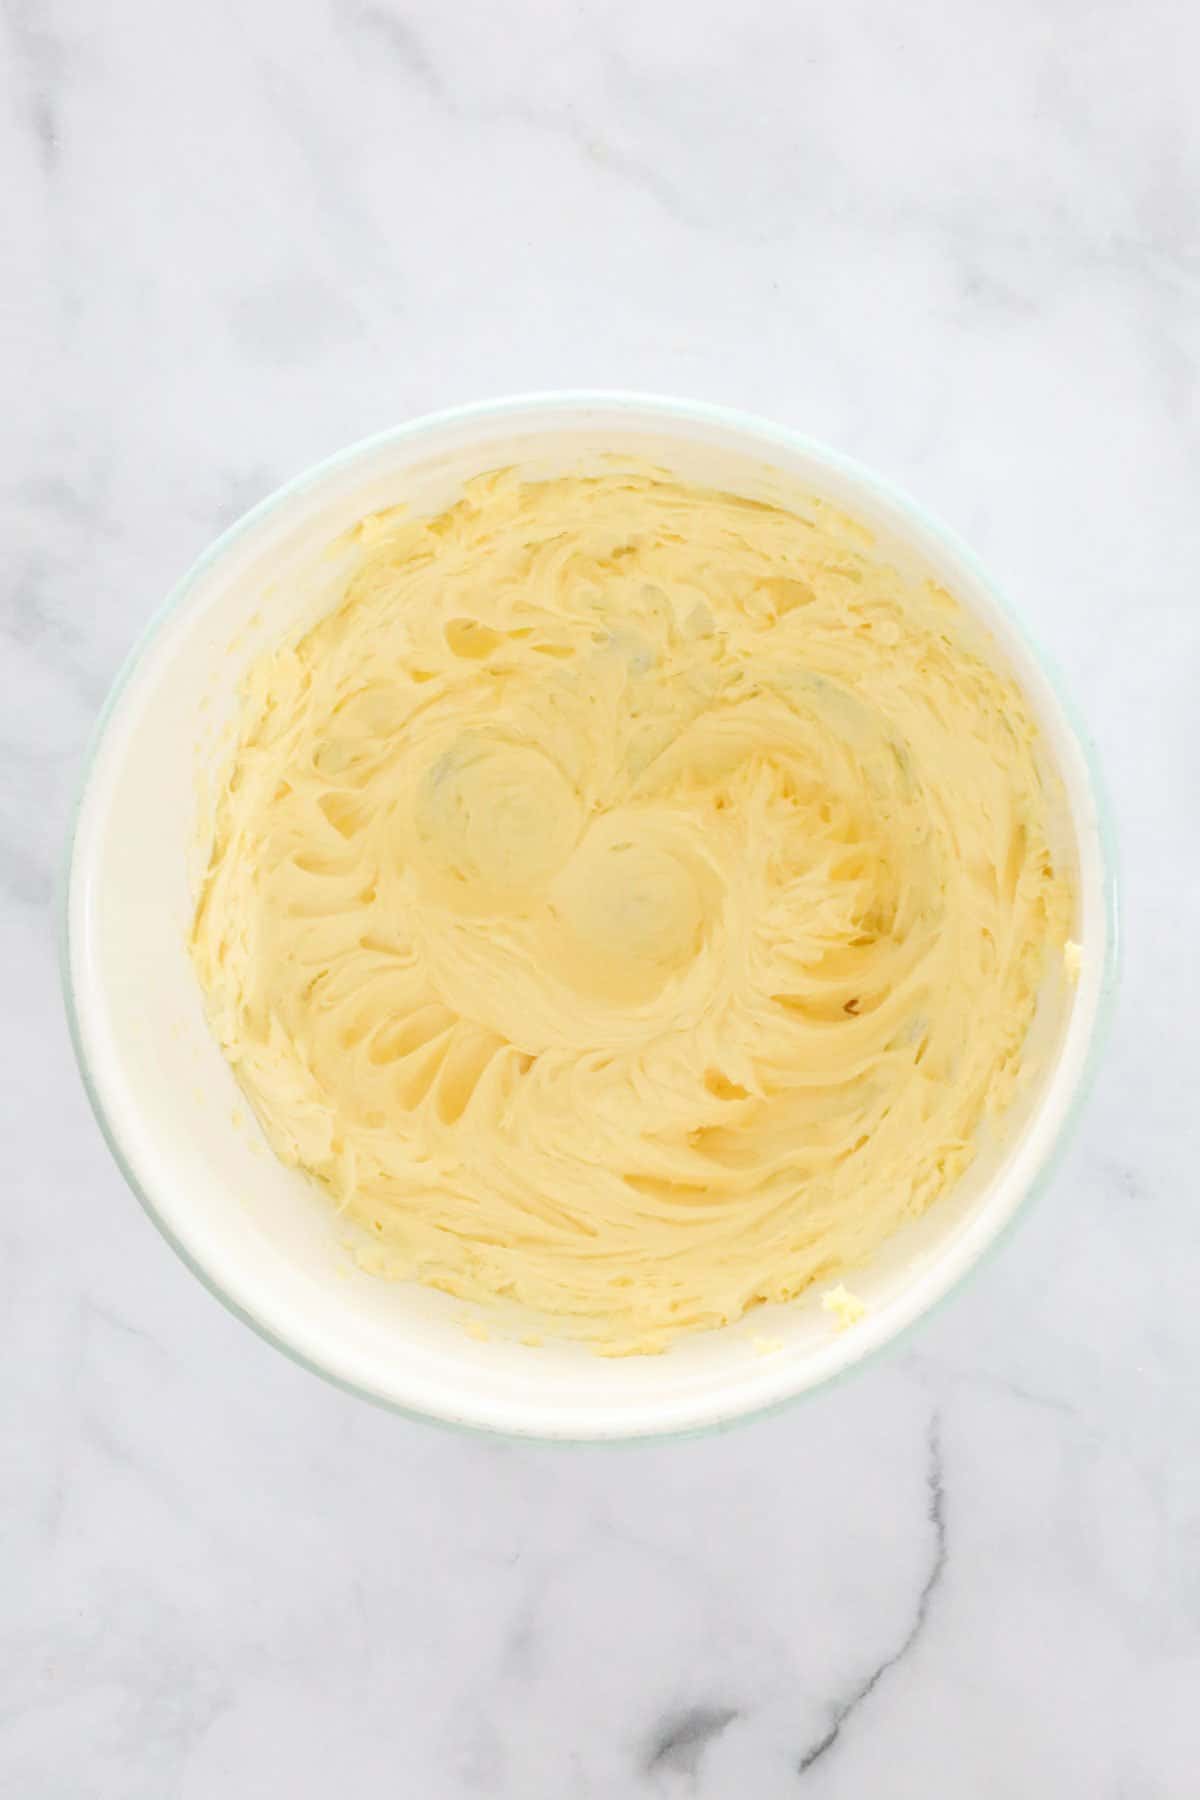 Soft beaten butter in a white mixing bowl.